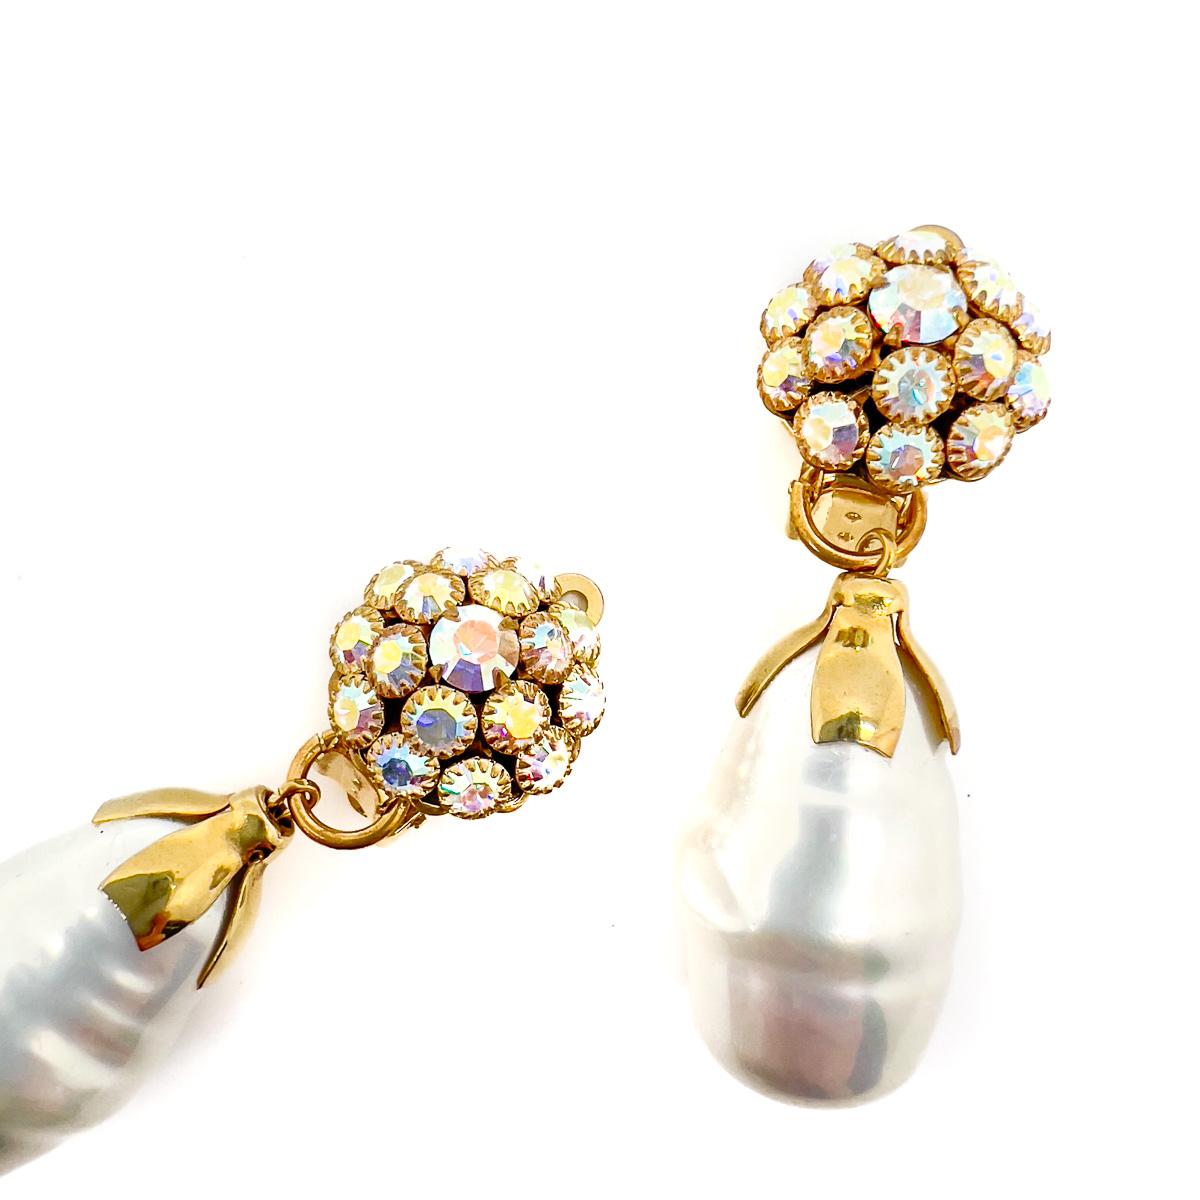 A pair of Vintage Baroque Pearl Drop Earrings. The aurora borealis top proving such a pretty adornment for the ear. Dropping away to a beautiful, extravagant glass baroque pearl suspended from an adorable gold plated pixie cap. Dreamy with an